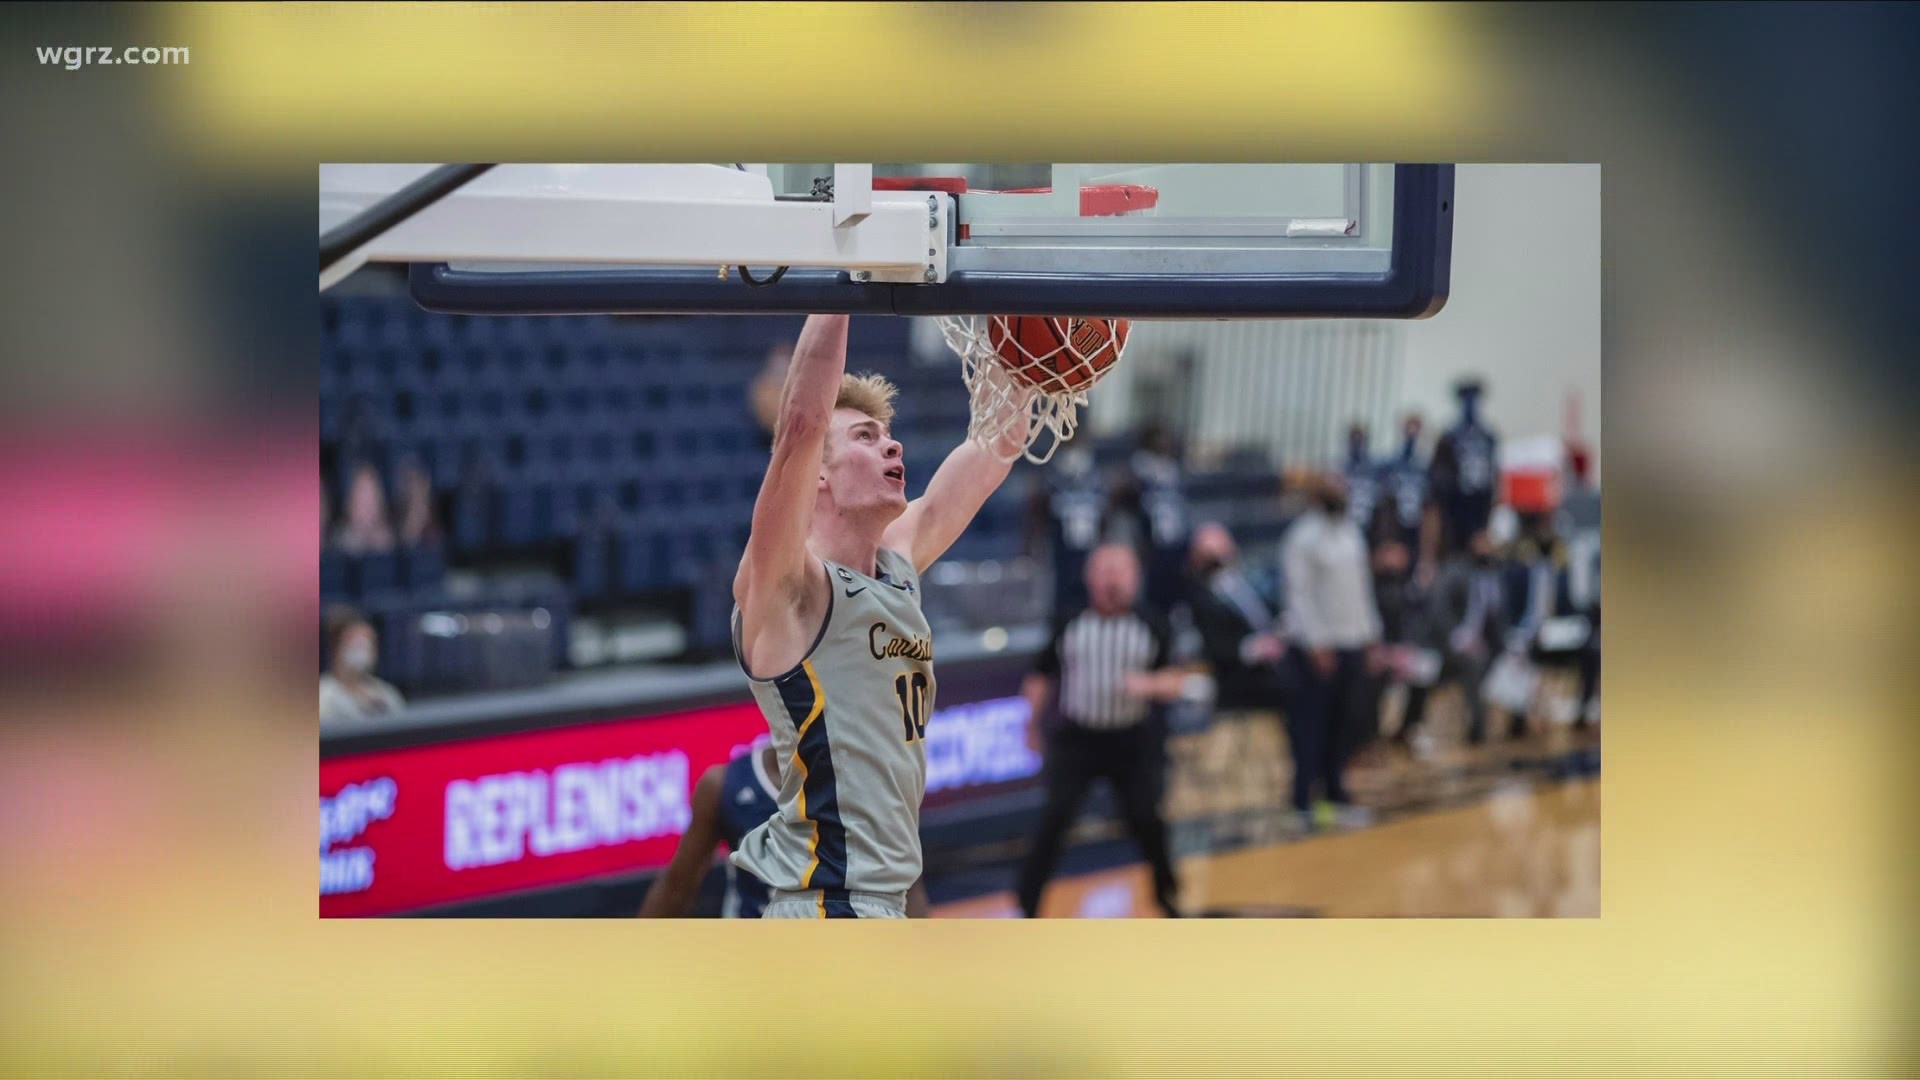 Canisius Men's Basketball struggles to see action through COVID-19